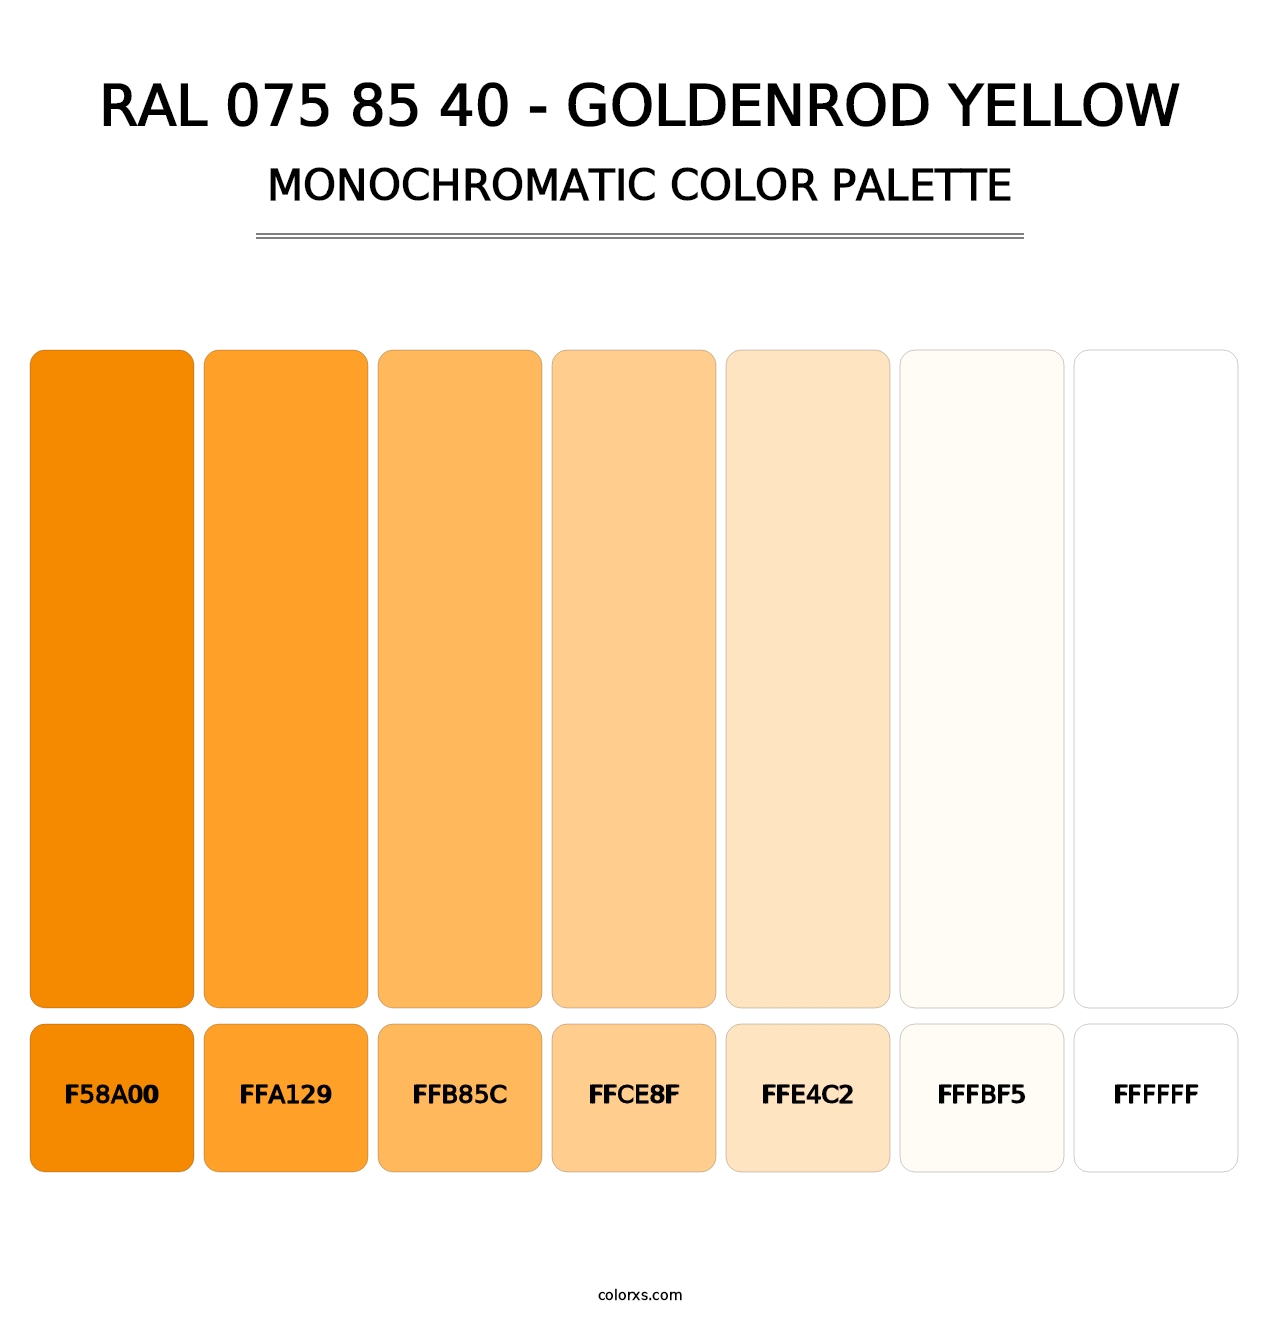 RAL 075 85 40 - Goldenrod Yellow - Monochromatic Color Palette